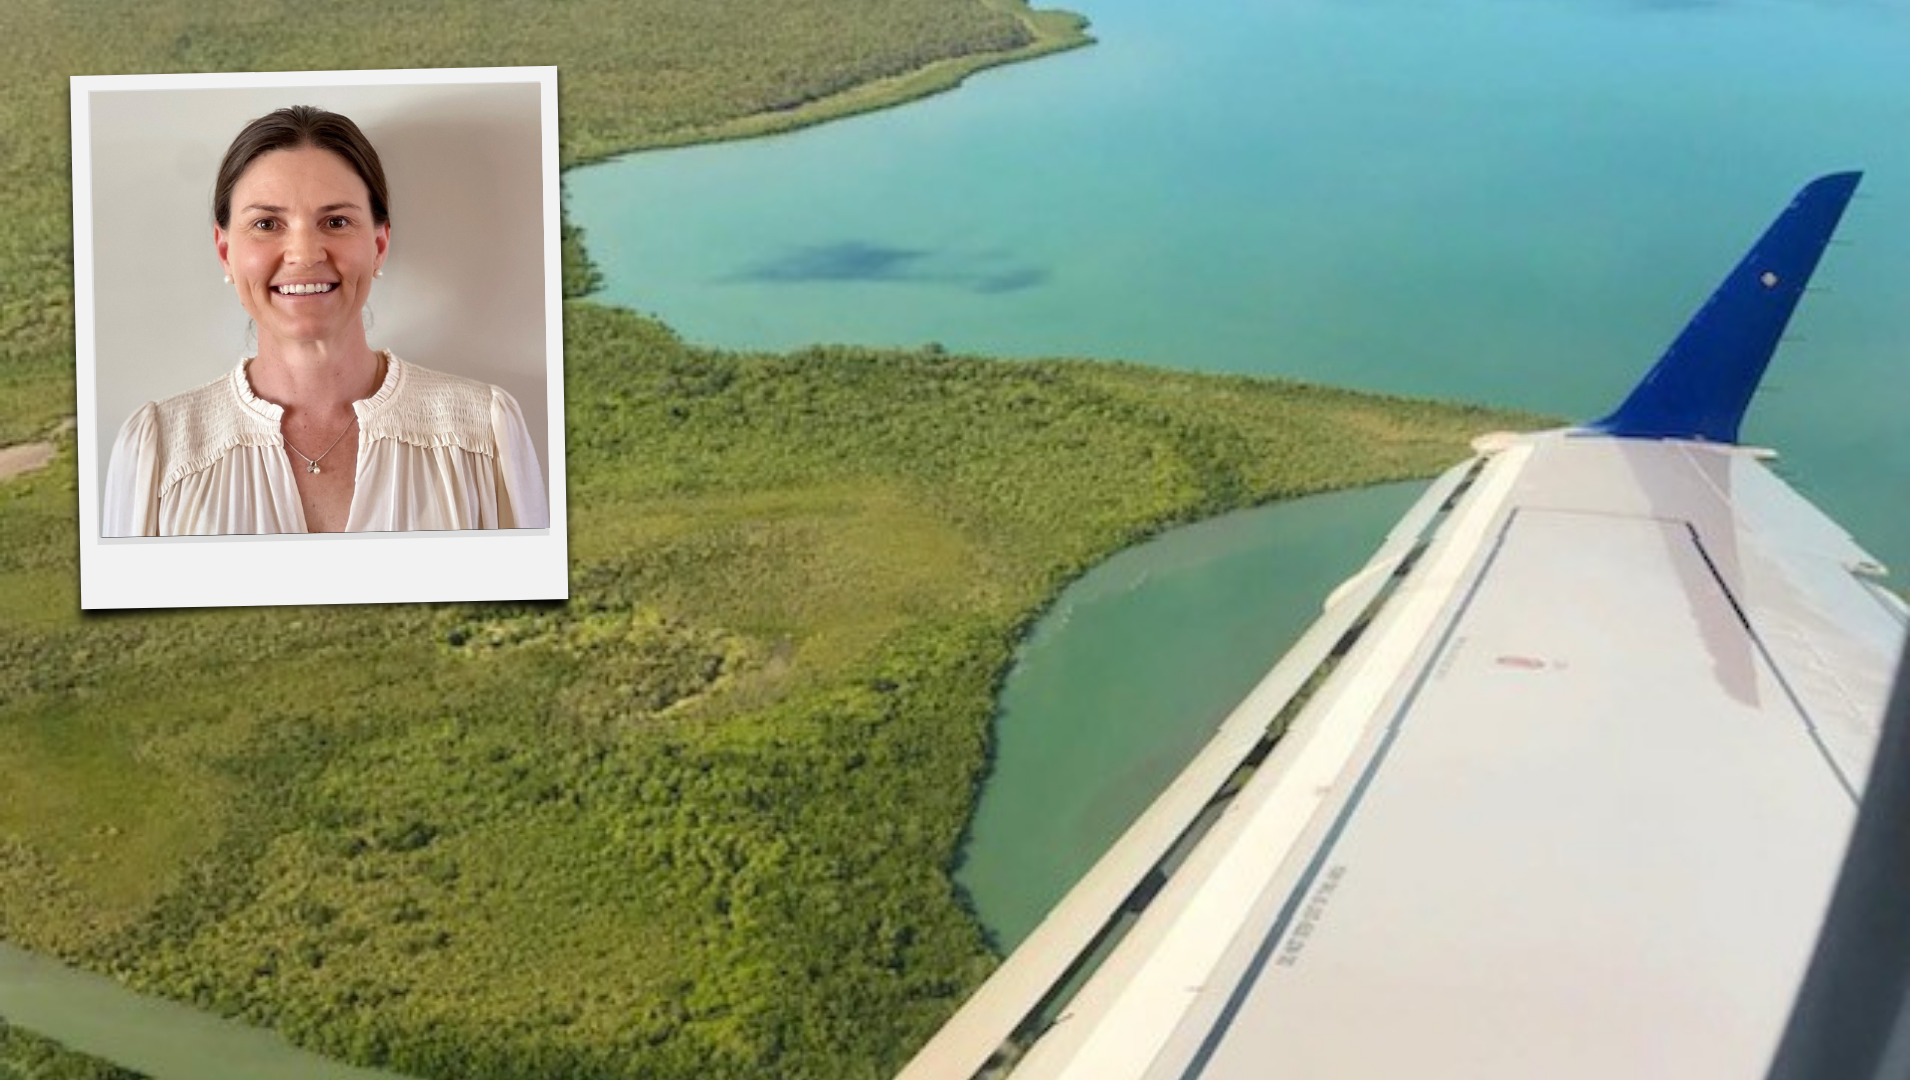 Photo of lush greenery and the ocean taken from a plane window, inset is photo of Rebecca